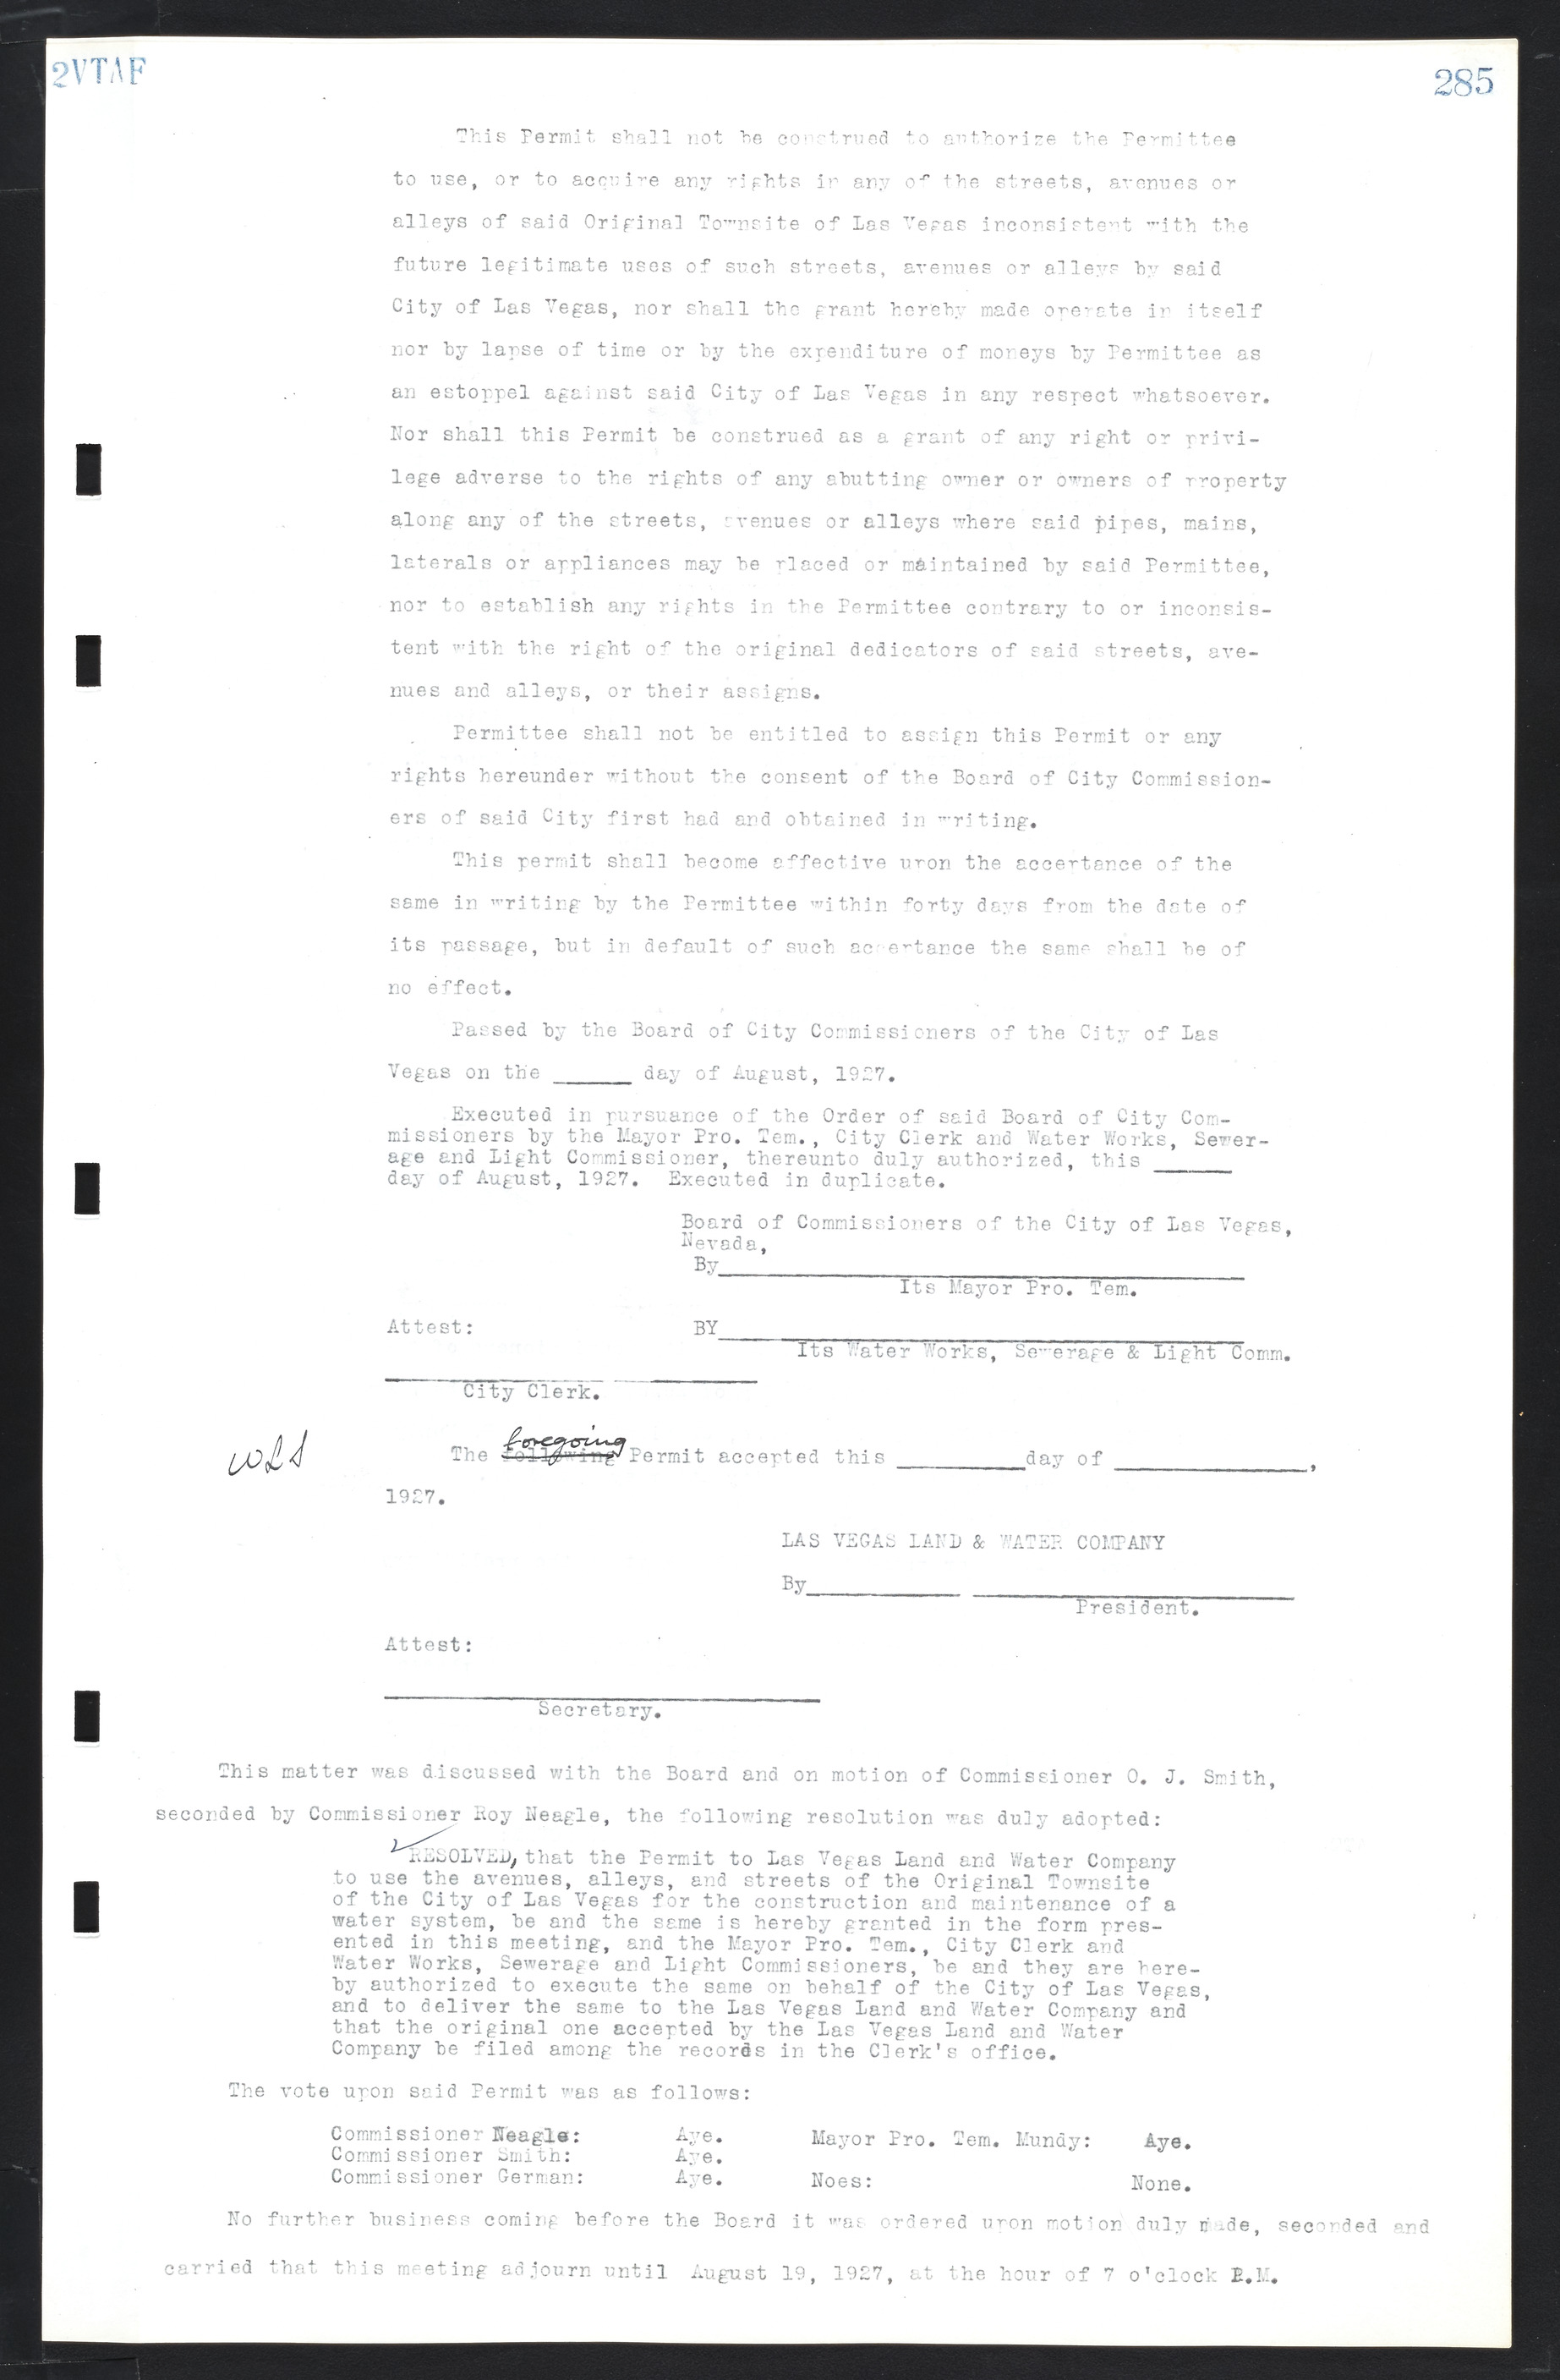 Las Vegas City Commission Minutes, March 1, 1922 to May 10, 1929, lvc000002-294